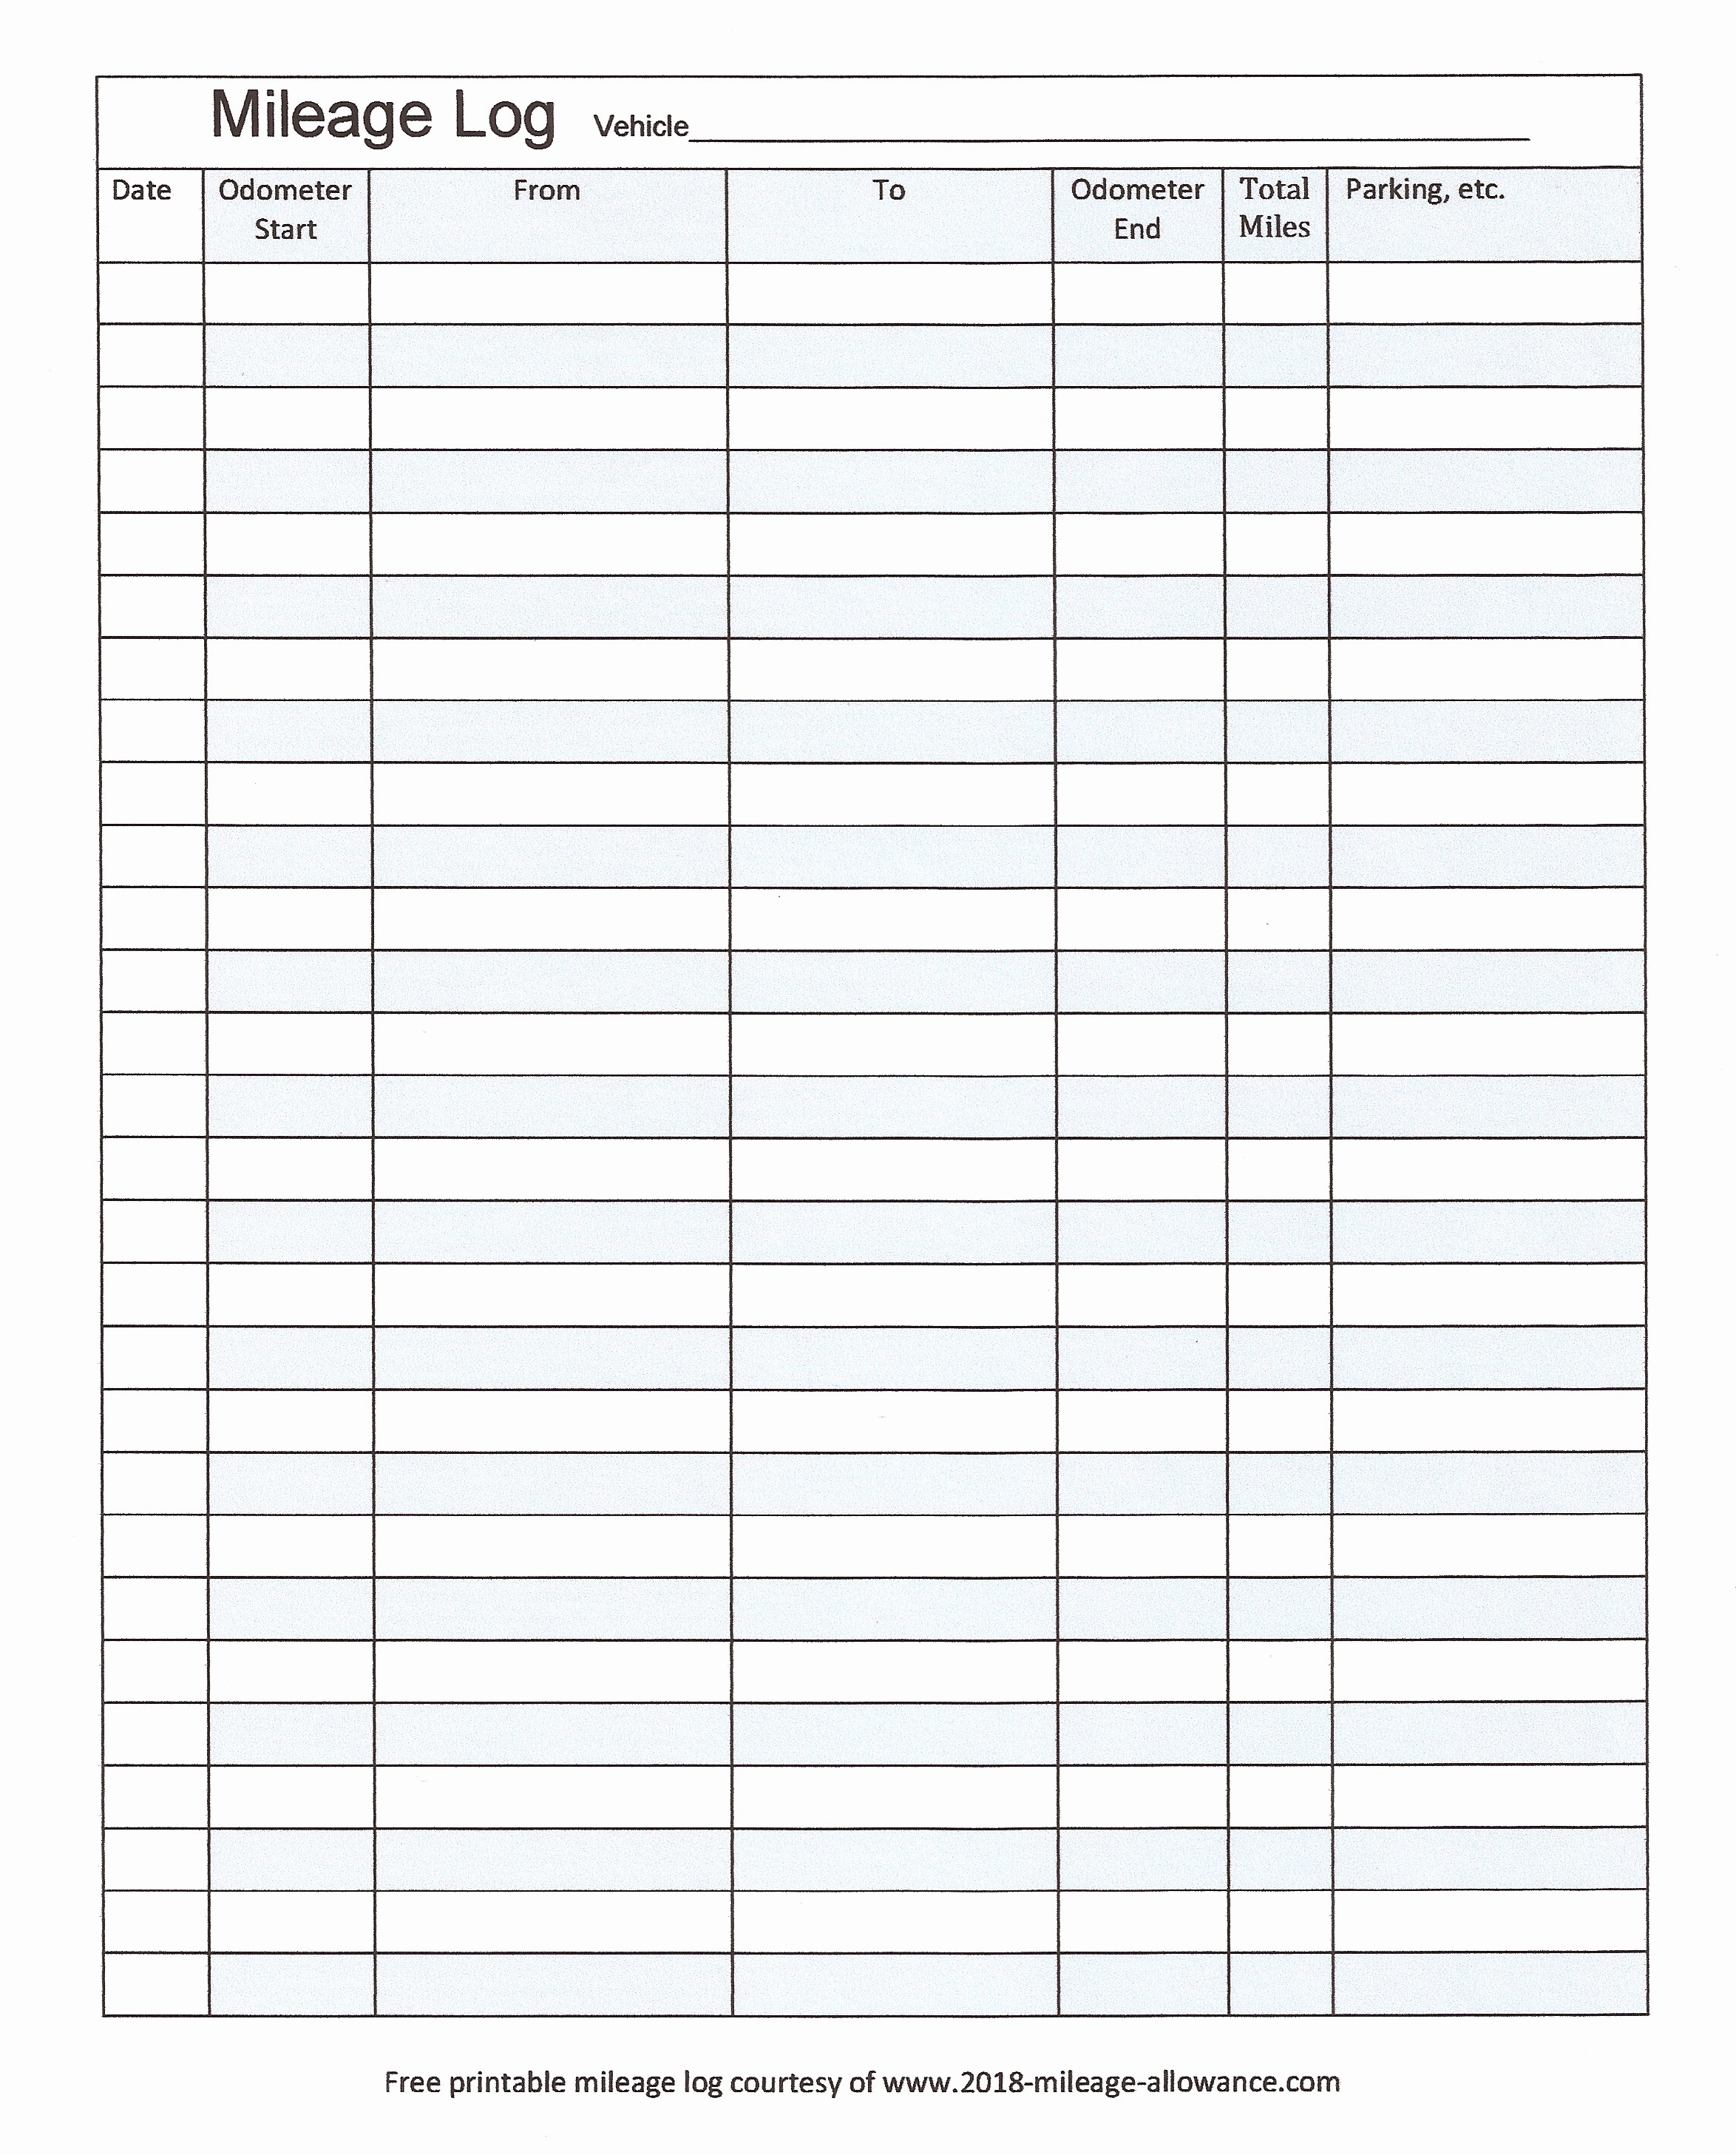 50 New Mileage Log Template For Self Employed DOCUMENTS IDEAS Document